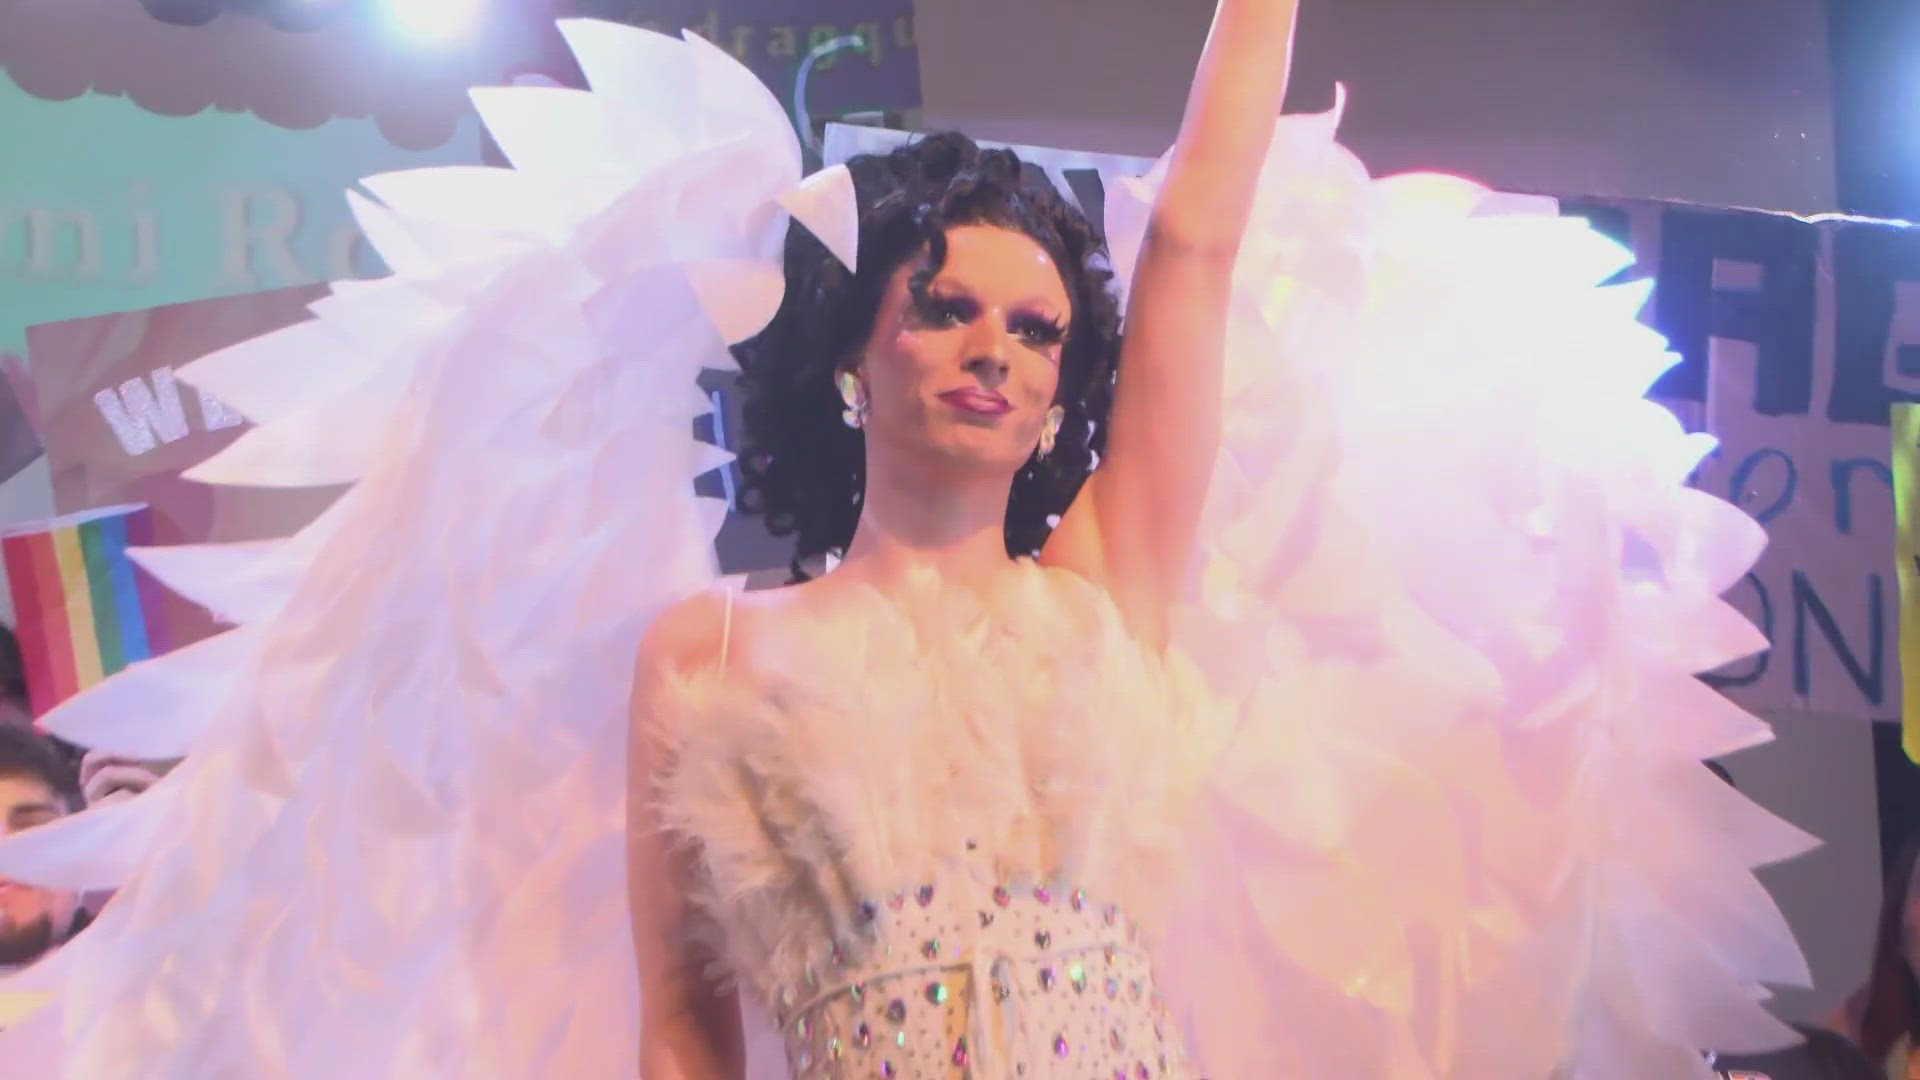 A federal judge from Tennessee has temporarily blocked an anti-drag law from going into effect.